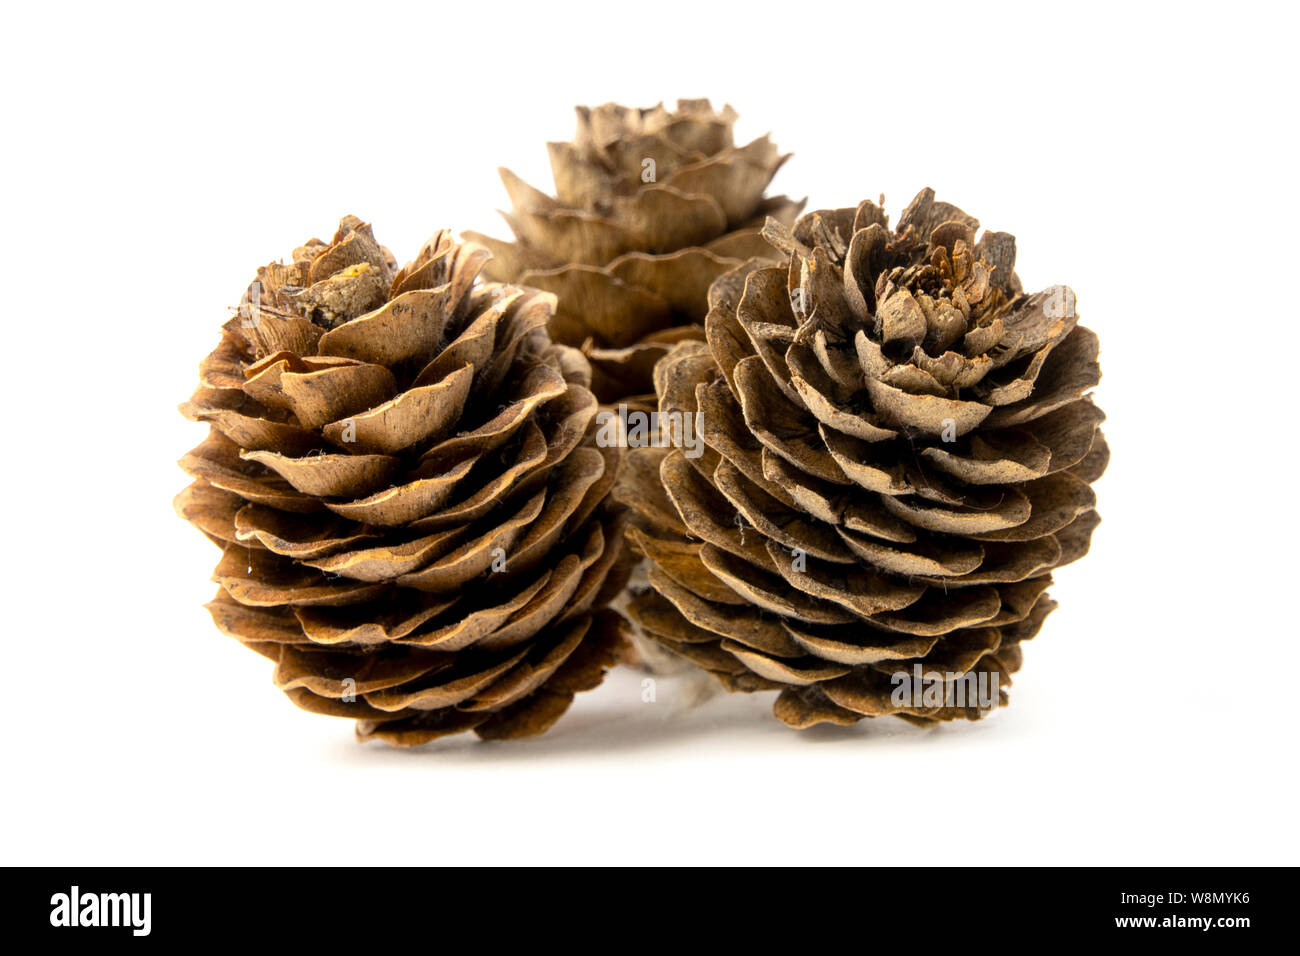 Conifer cone on a white background Stock Photo